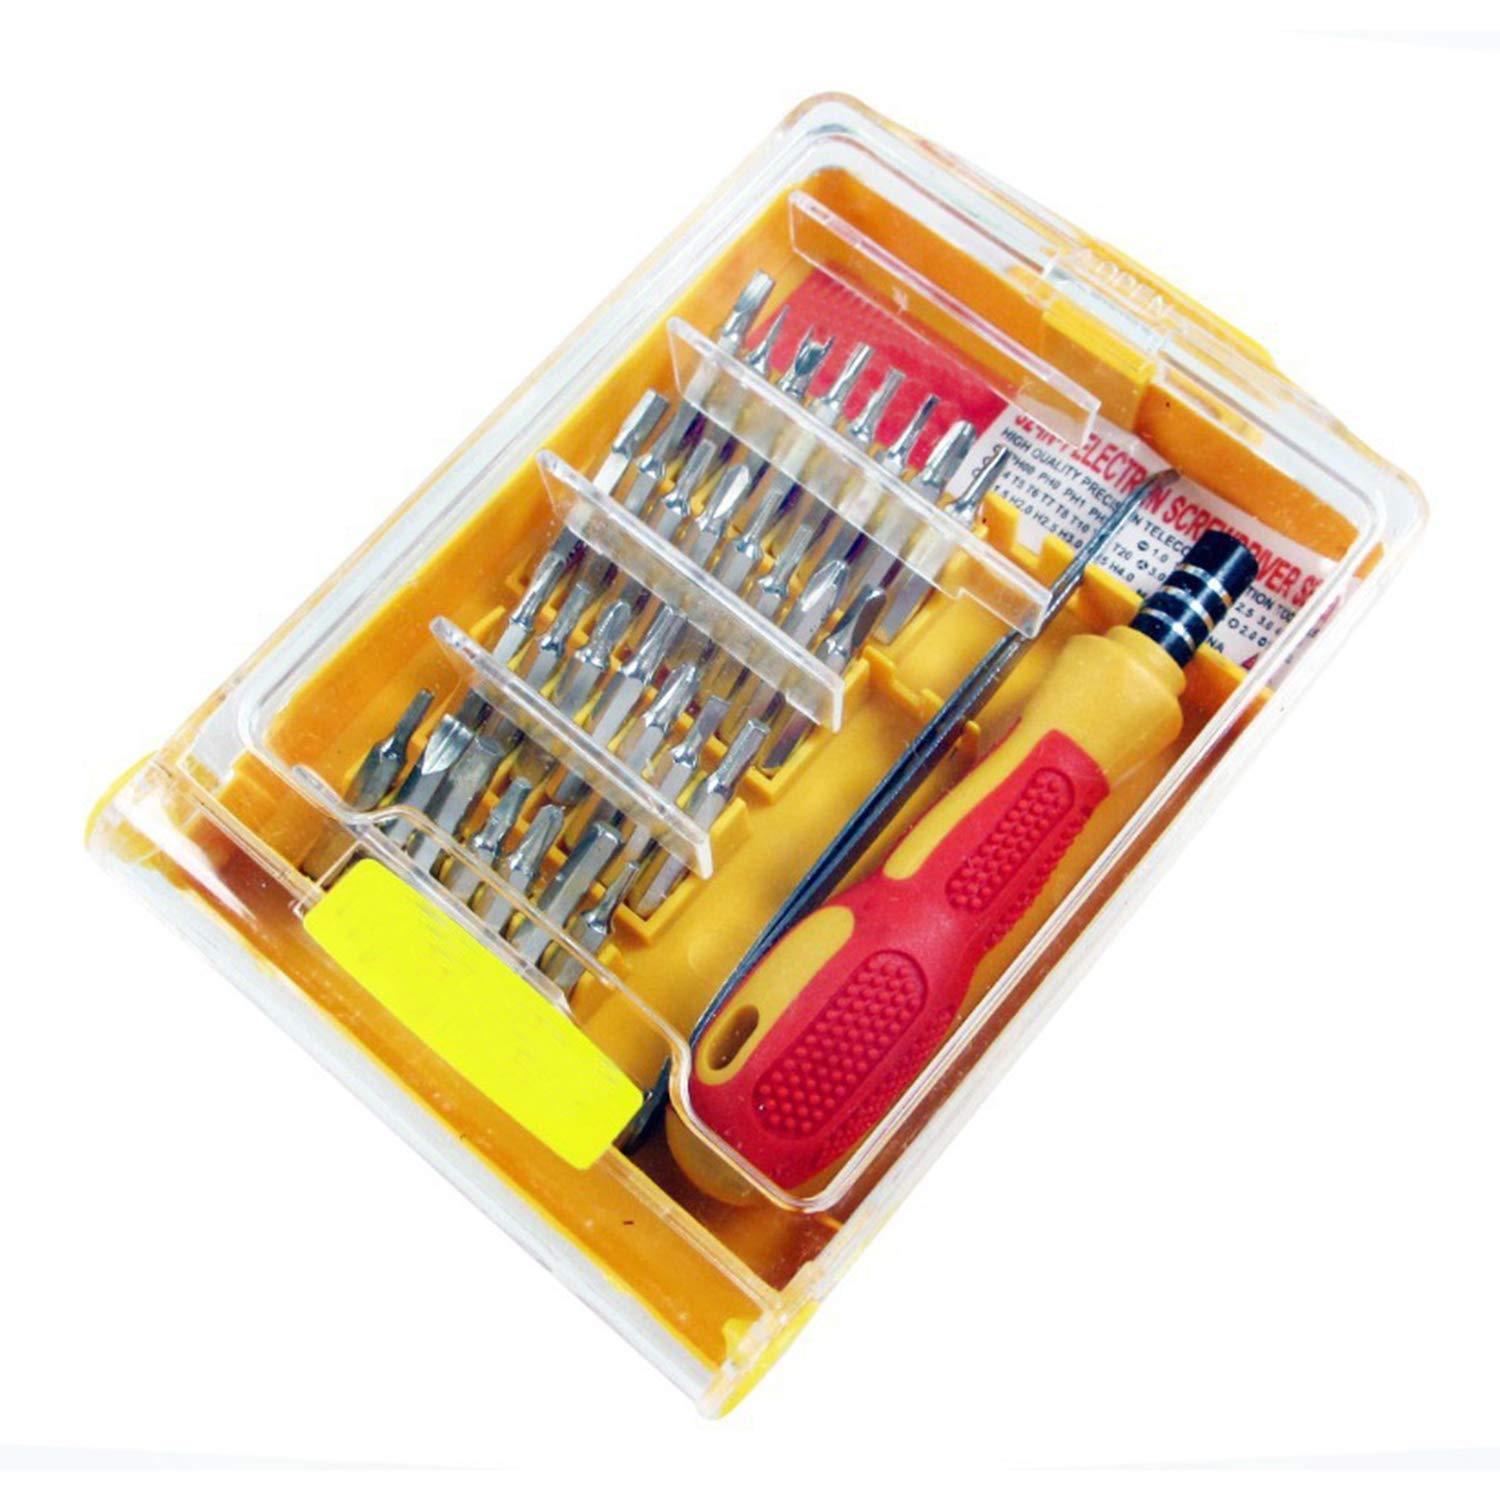 professional screwdriver set 32 in 1 interchangeable precise screwdriver tool set with magnetic holder screwdriver screwdriver all in one